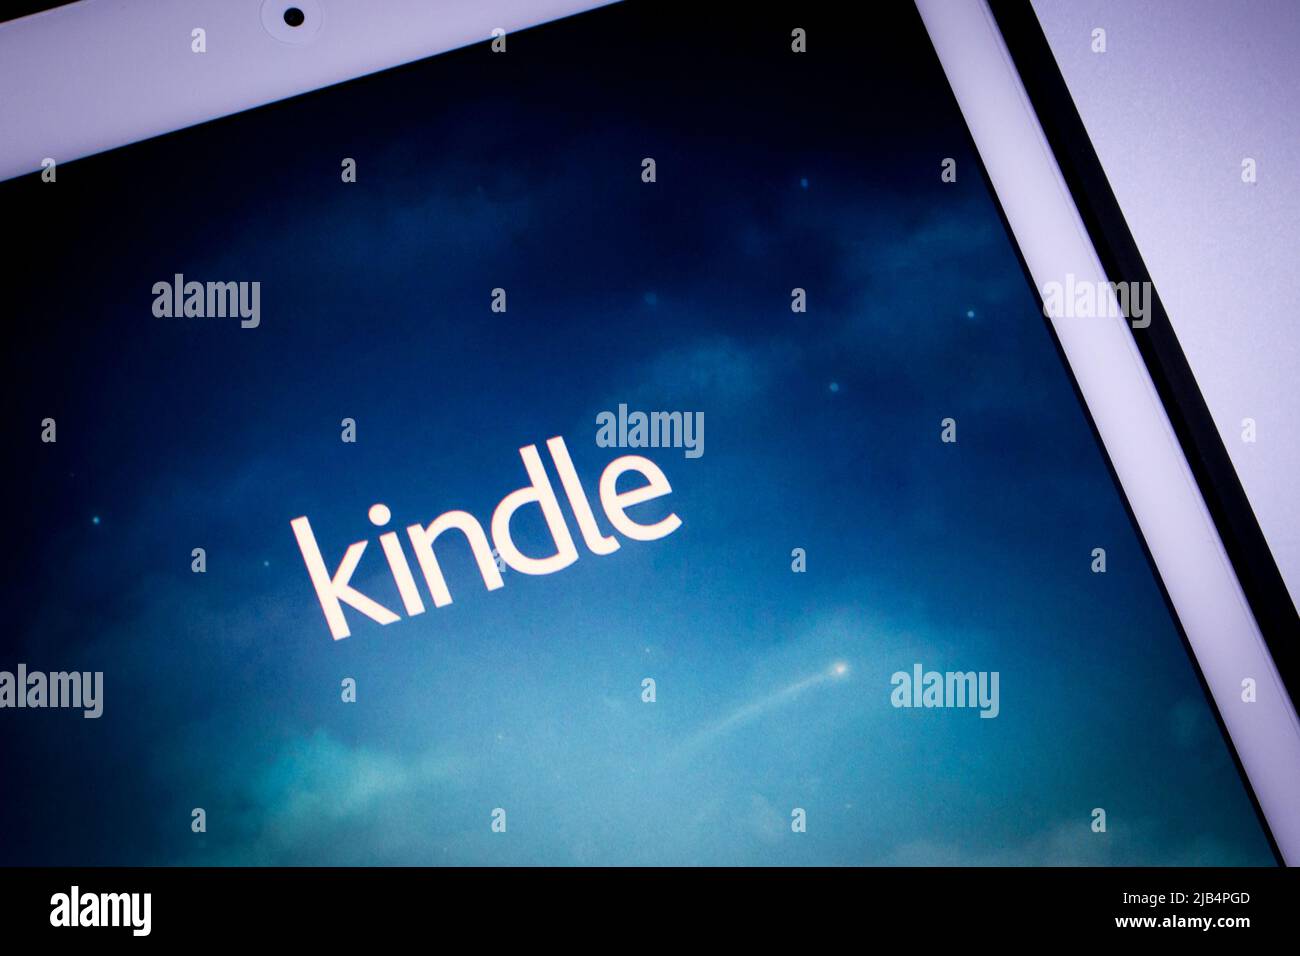 Kindle app, e-book reader by Amazon, on iPad. From Amazon website or Kindle Store, an online e-book store by Amazon, users can purchase an e-book. Stock Photo